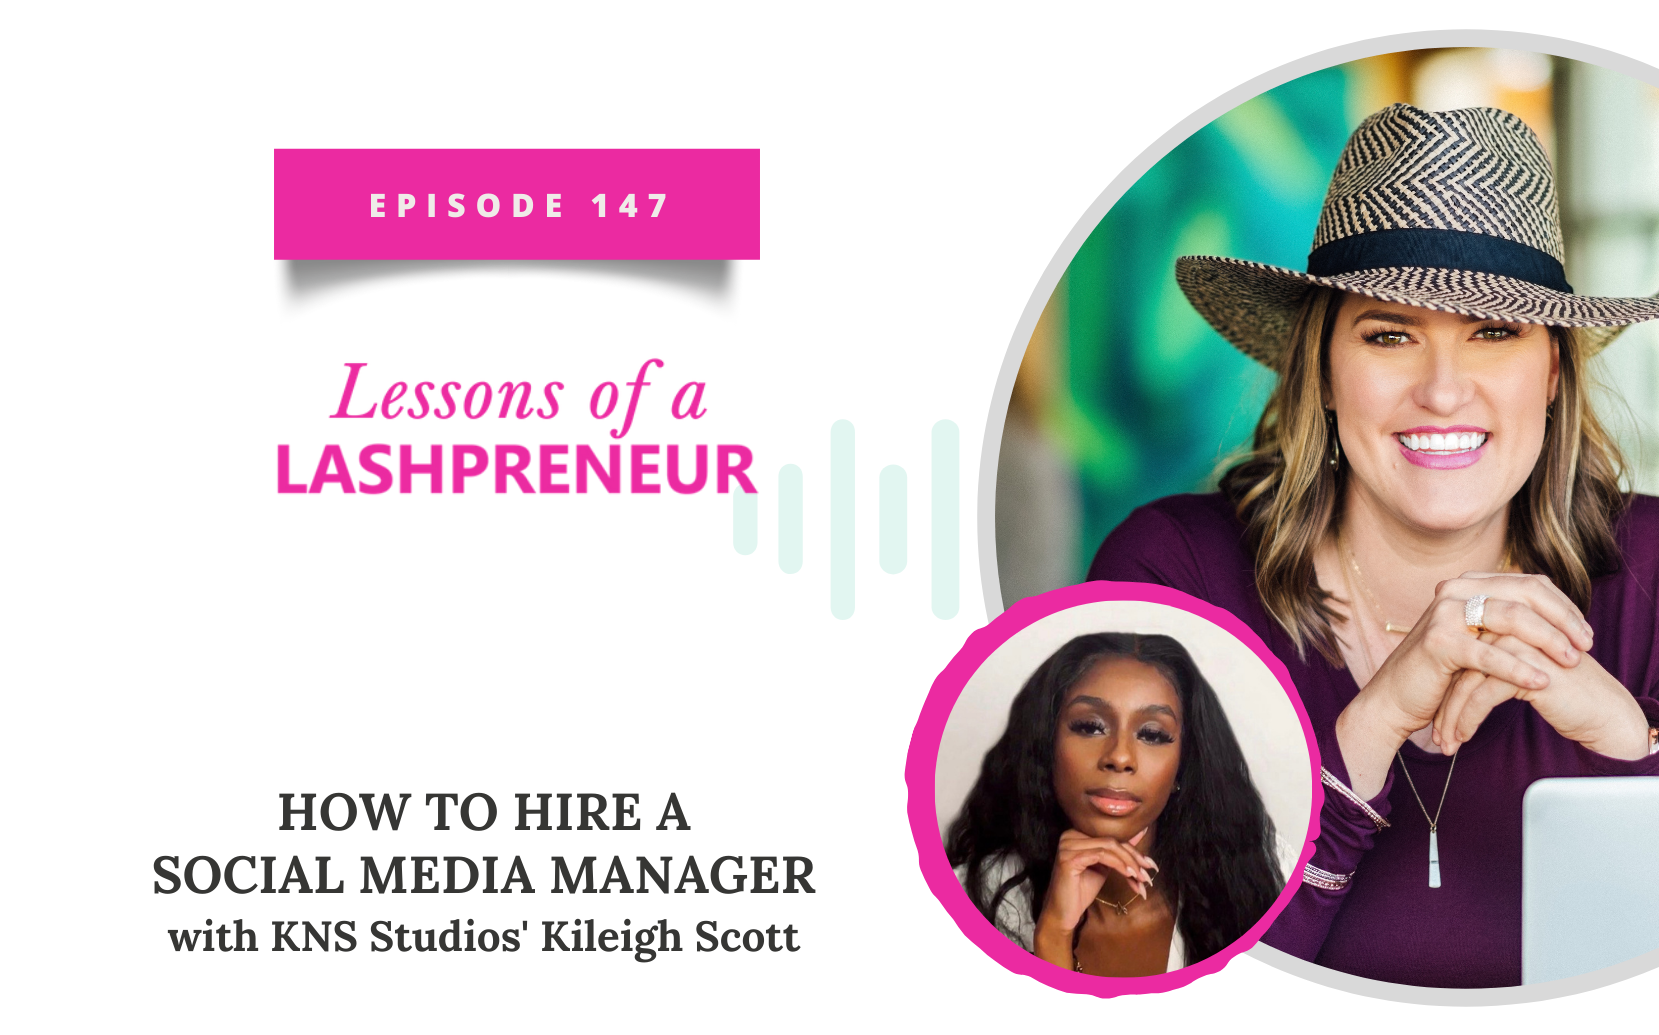 How to Hire a Social Media Manager with KNS Studios’ Kileigh Scott